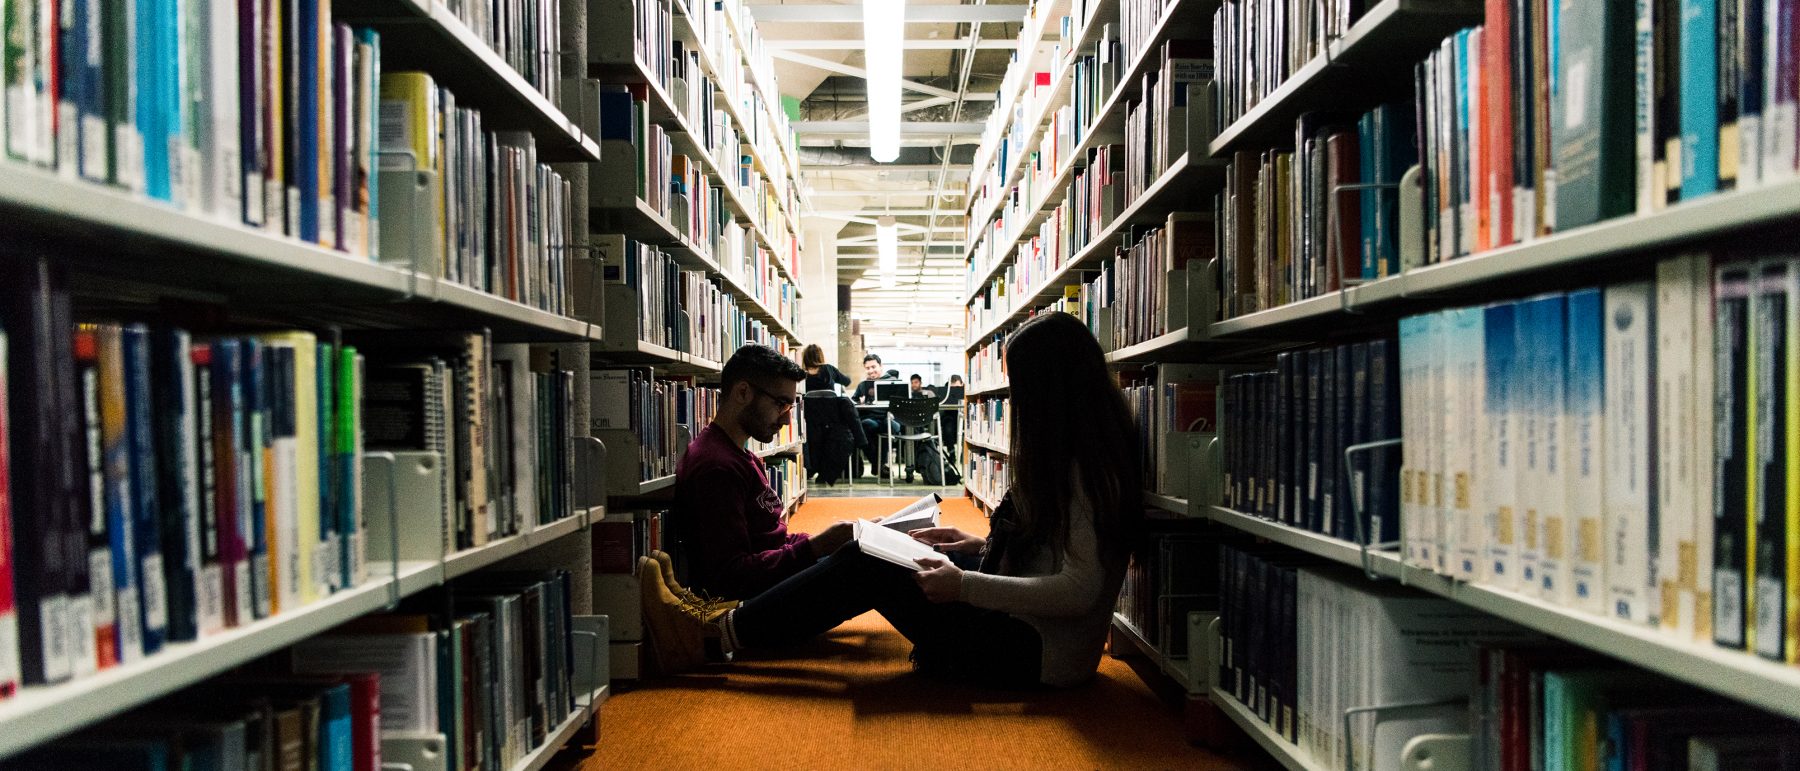 Two students studying on the floor in an aisle of the library